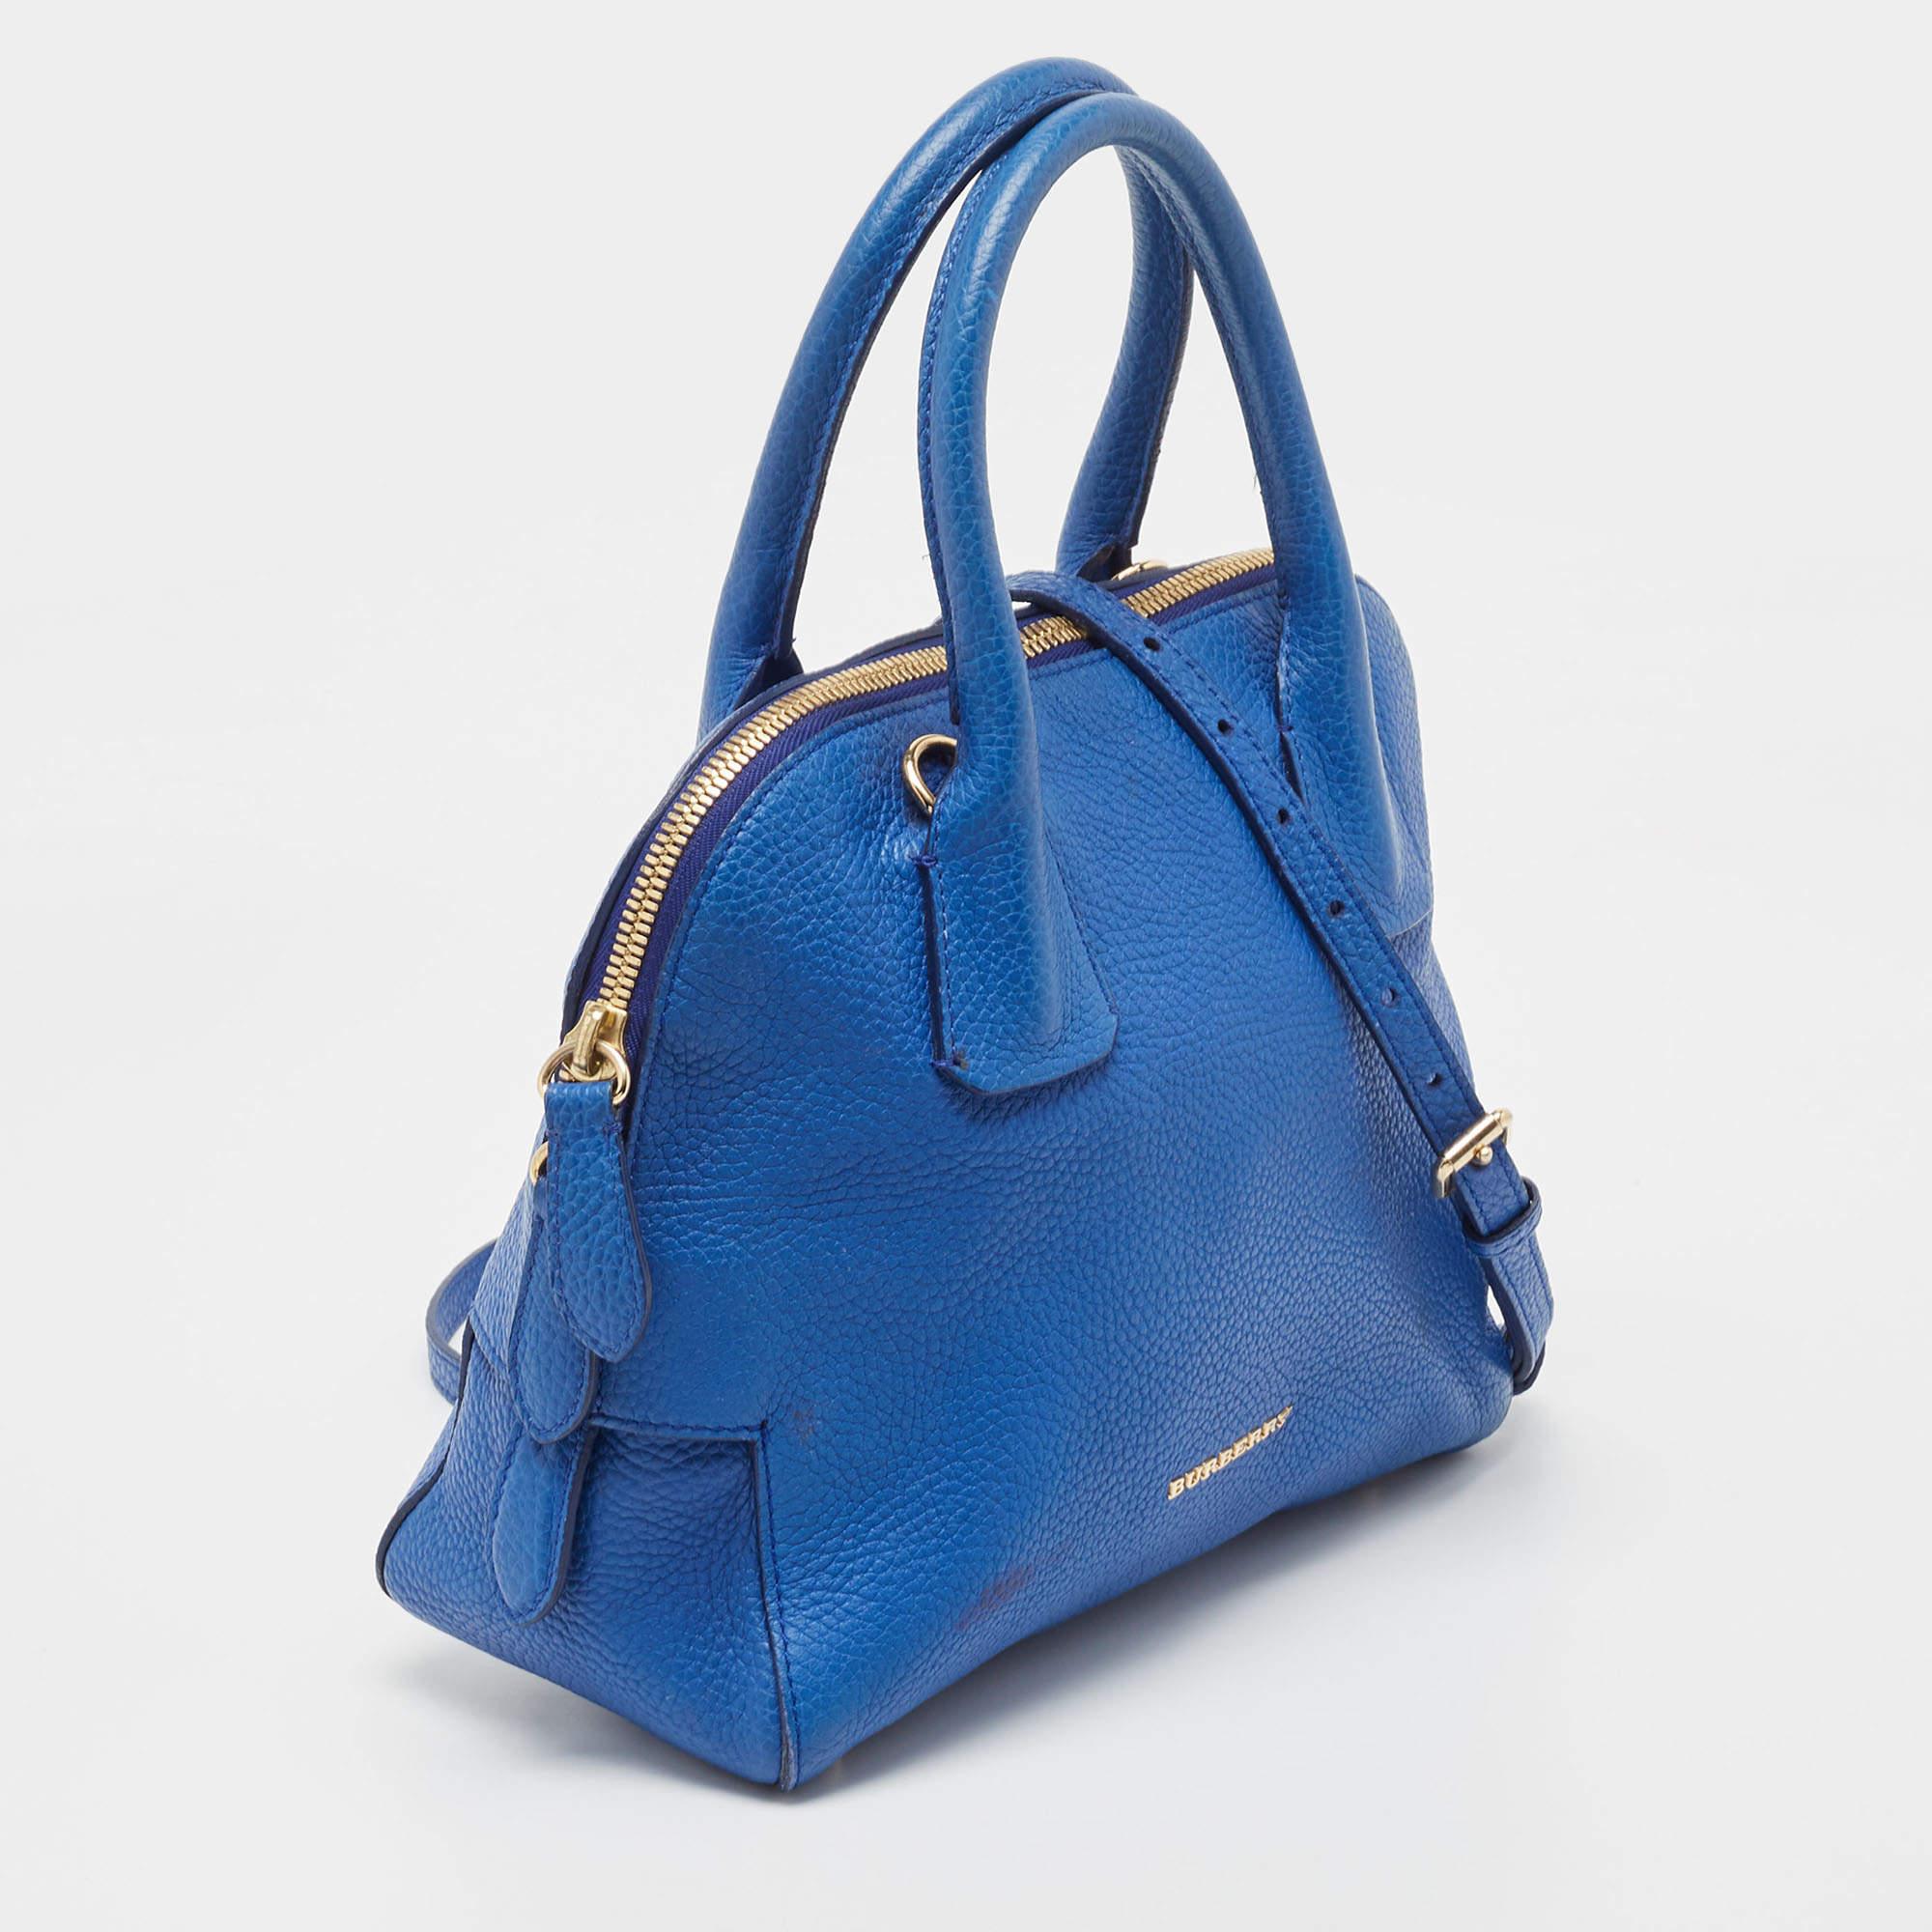 This beautifully crafted pebbled leather satchel will surely fetch you a lot of compliments. The fine fabric on the inside of the bag is well lined. This Burberry bag is simply unmatched in its grandeur and trendy design. This blue bag is sure to be